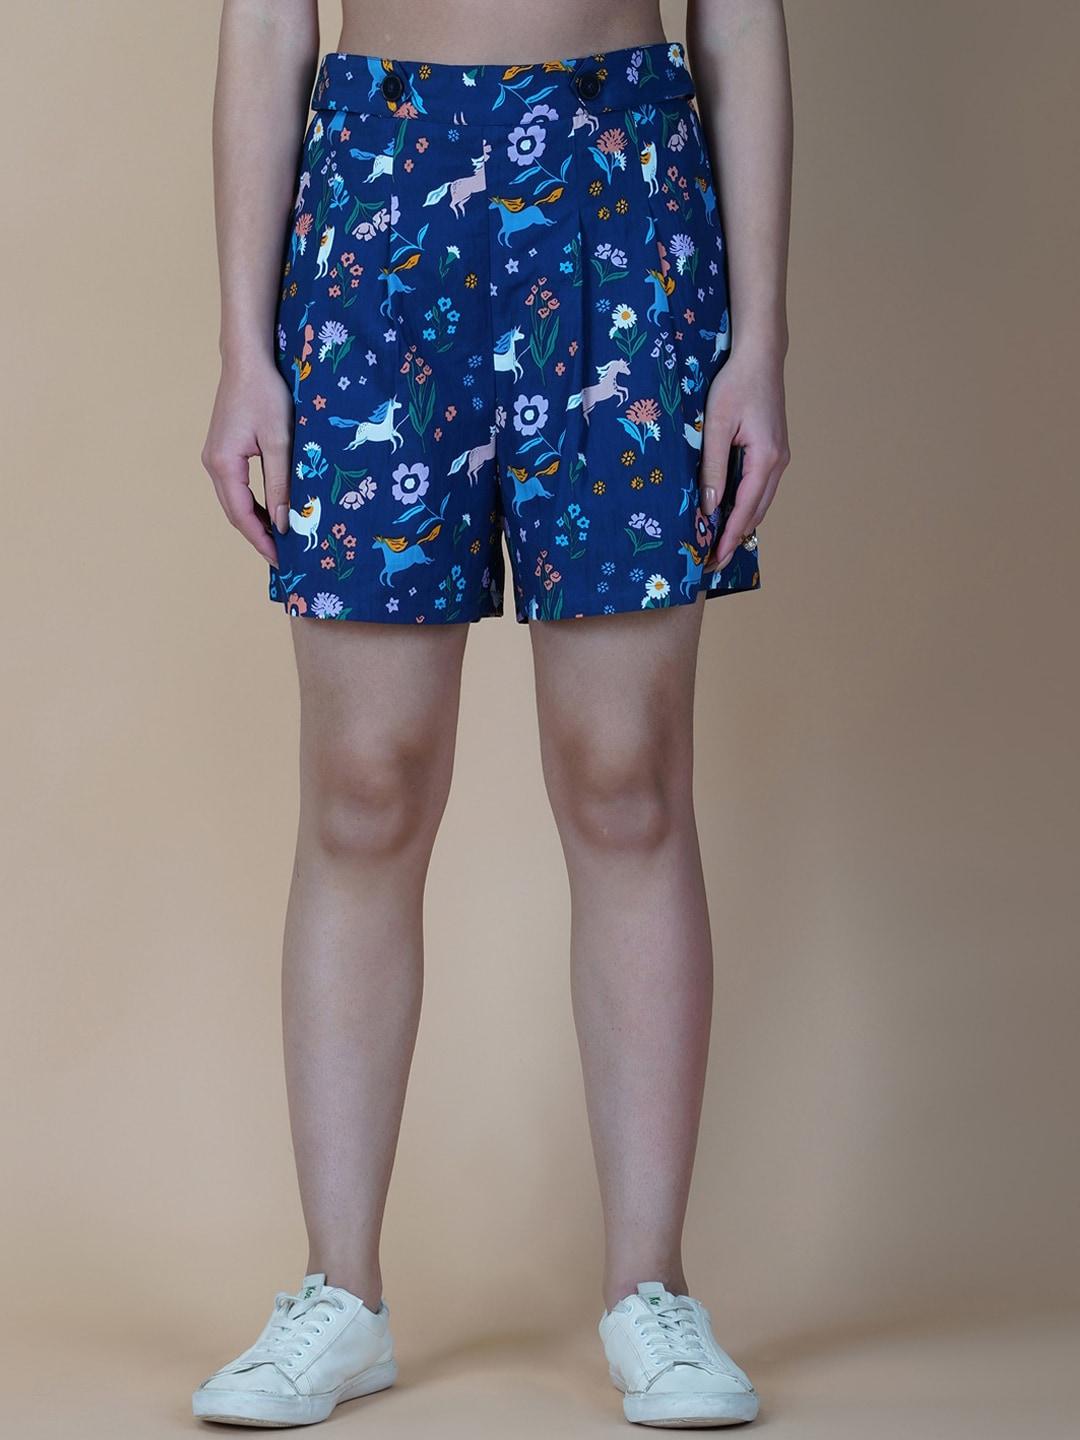 raassio women floral printed shorts